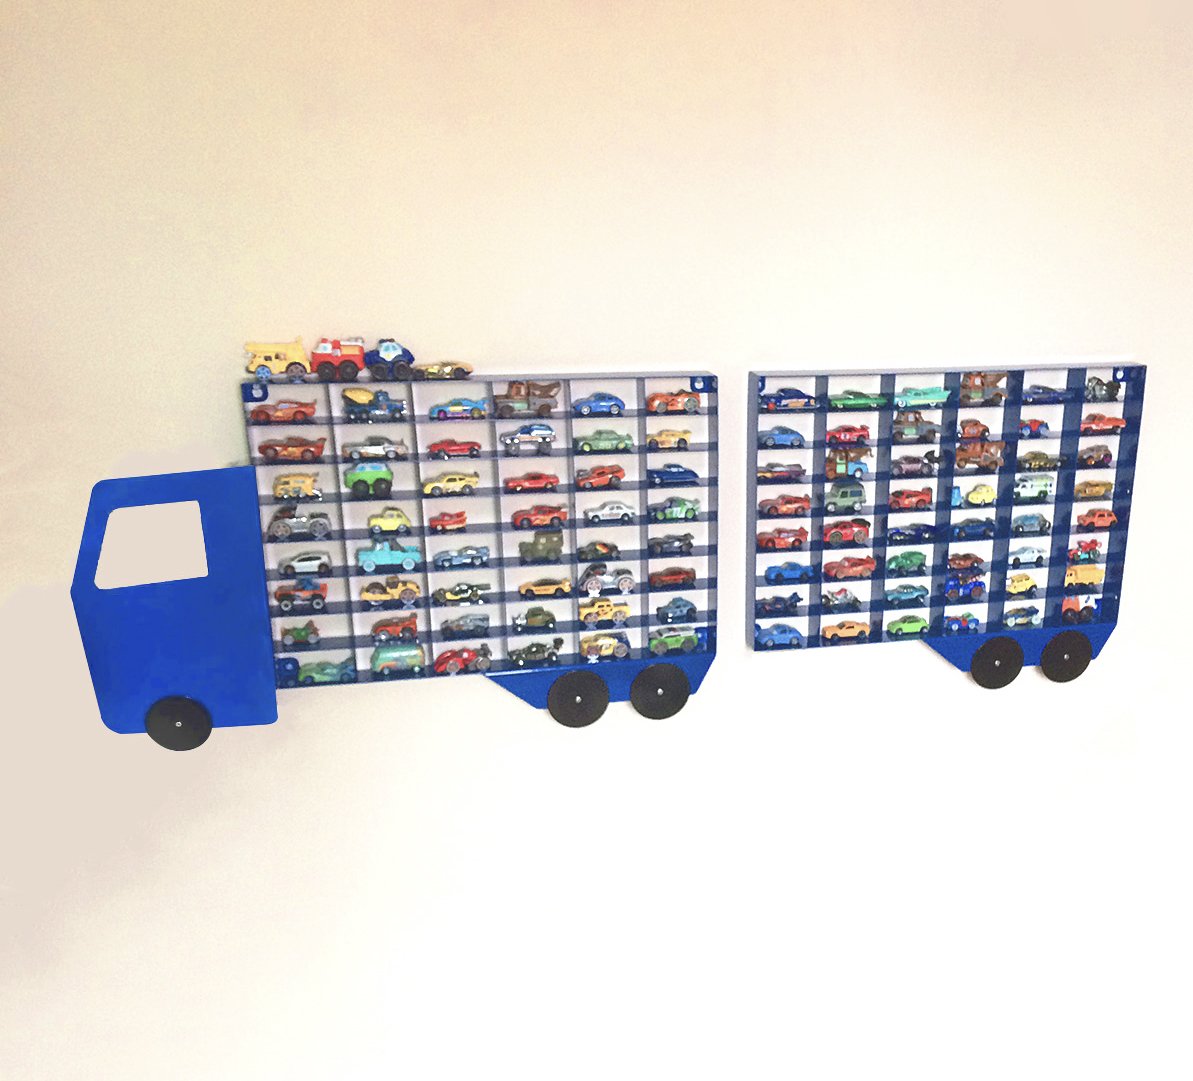 Toy Car Wall Mount Storage Display Unit - Blue Truck - Indoor Outdoors